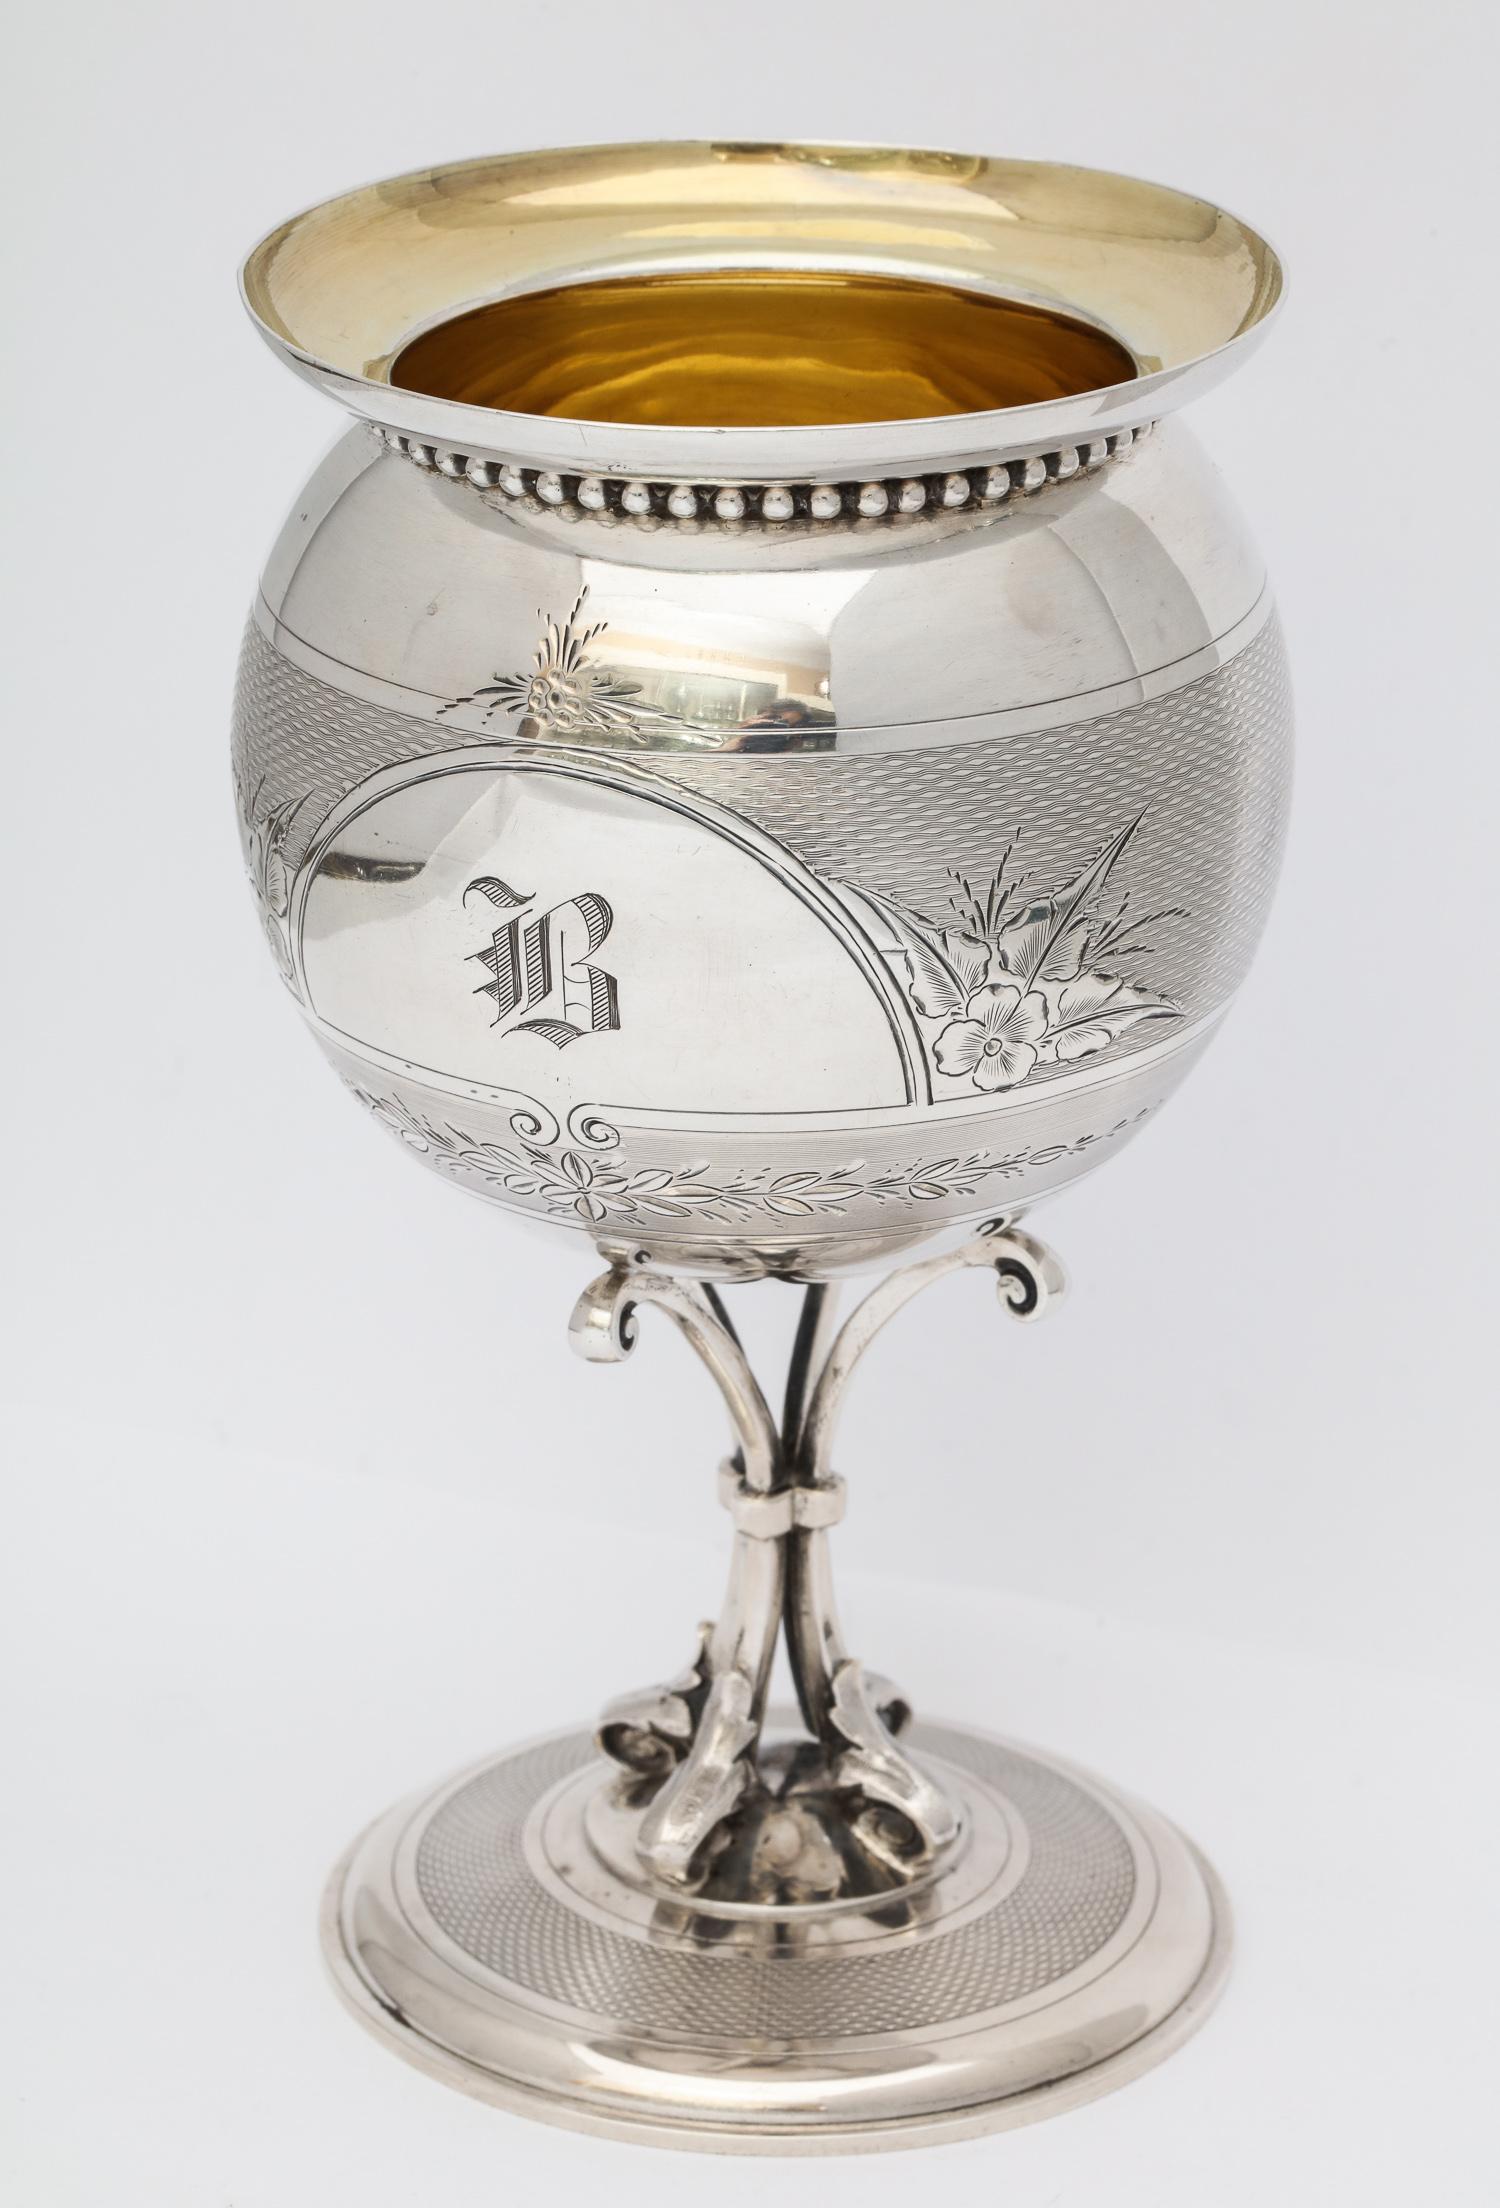 Mid-19th Century American, Neoclassical Coin Silver Vase by Gorham